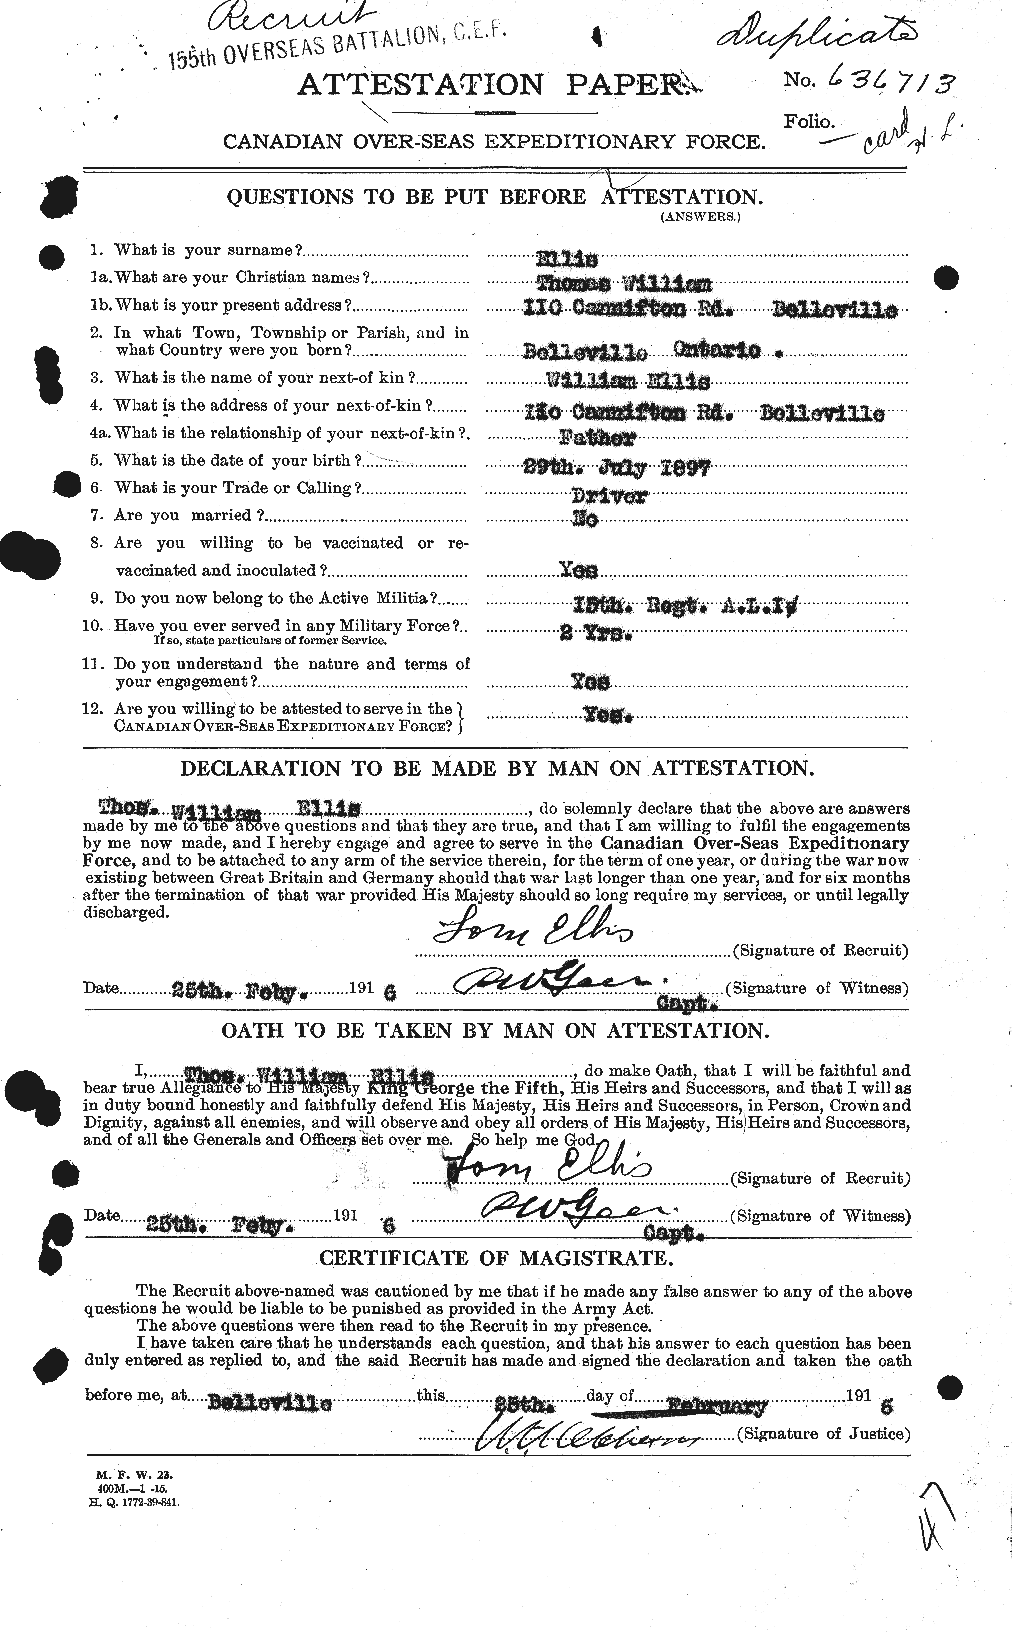 Personnel Records of the First World War - CEF 313641a